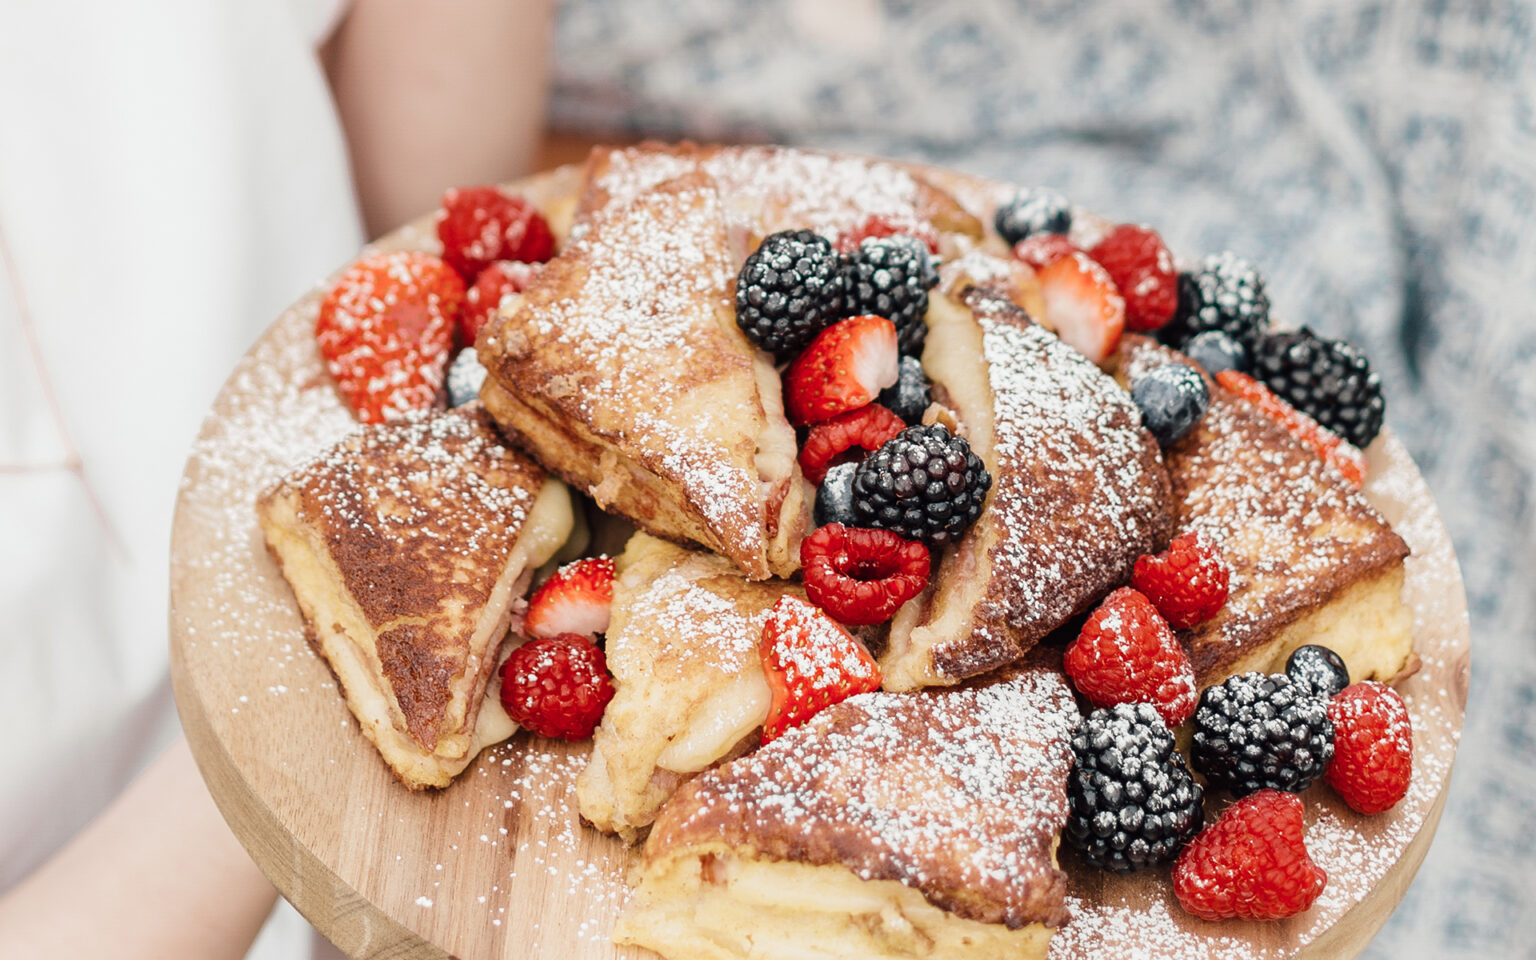 Plate of Monte Cristo's with dusting of powder sugar and berries